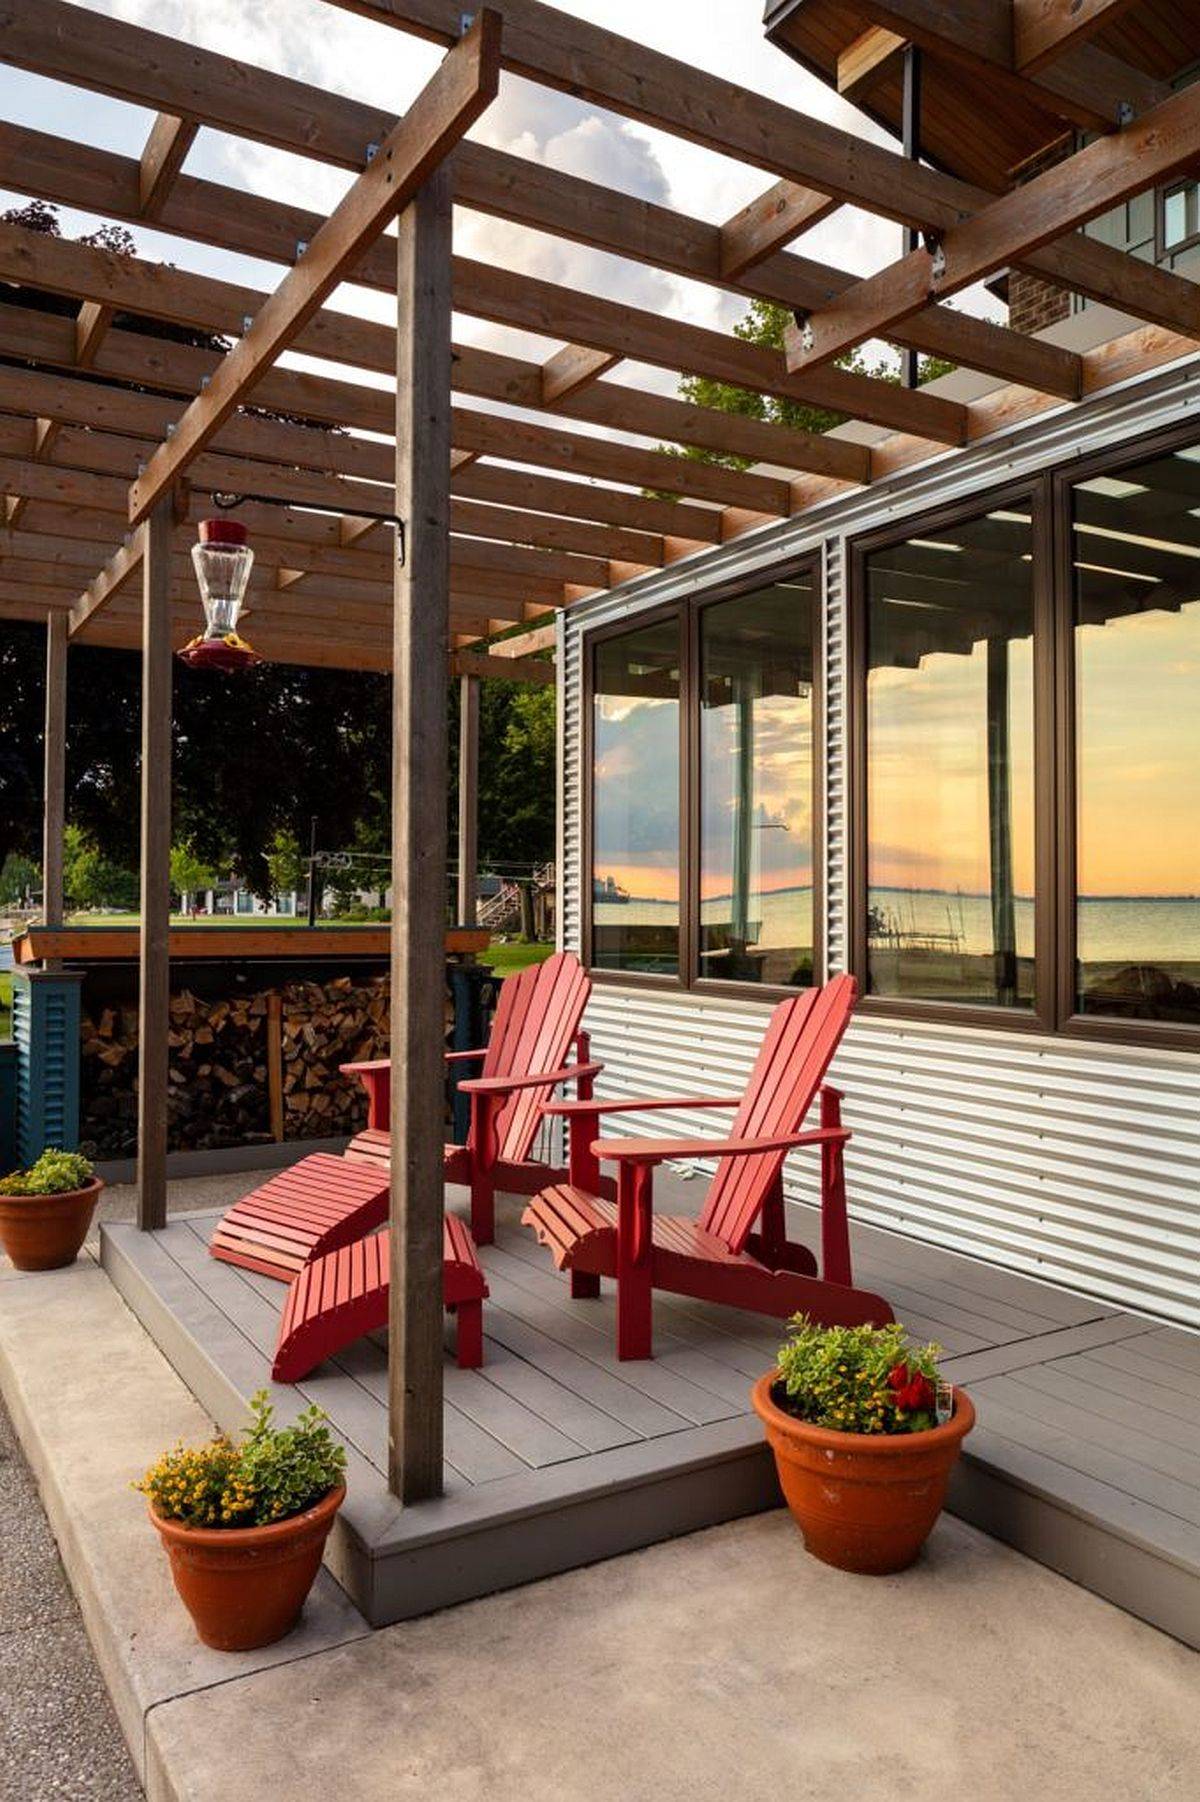 Colorful-chairs-in-red-add-a-touch-of-rustic-charm-to-the-deck-with-cedar-trellis-aove-and-water-views-13400